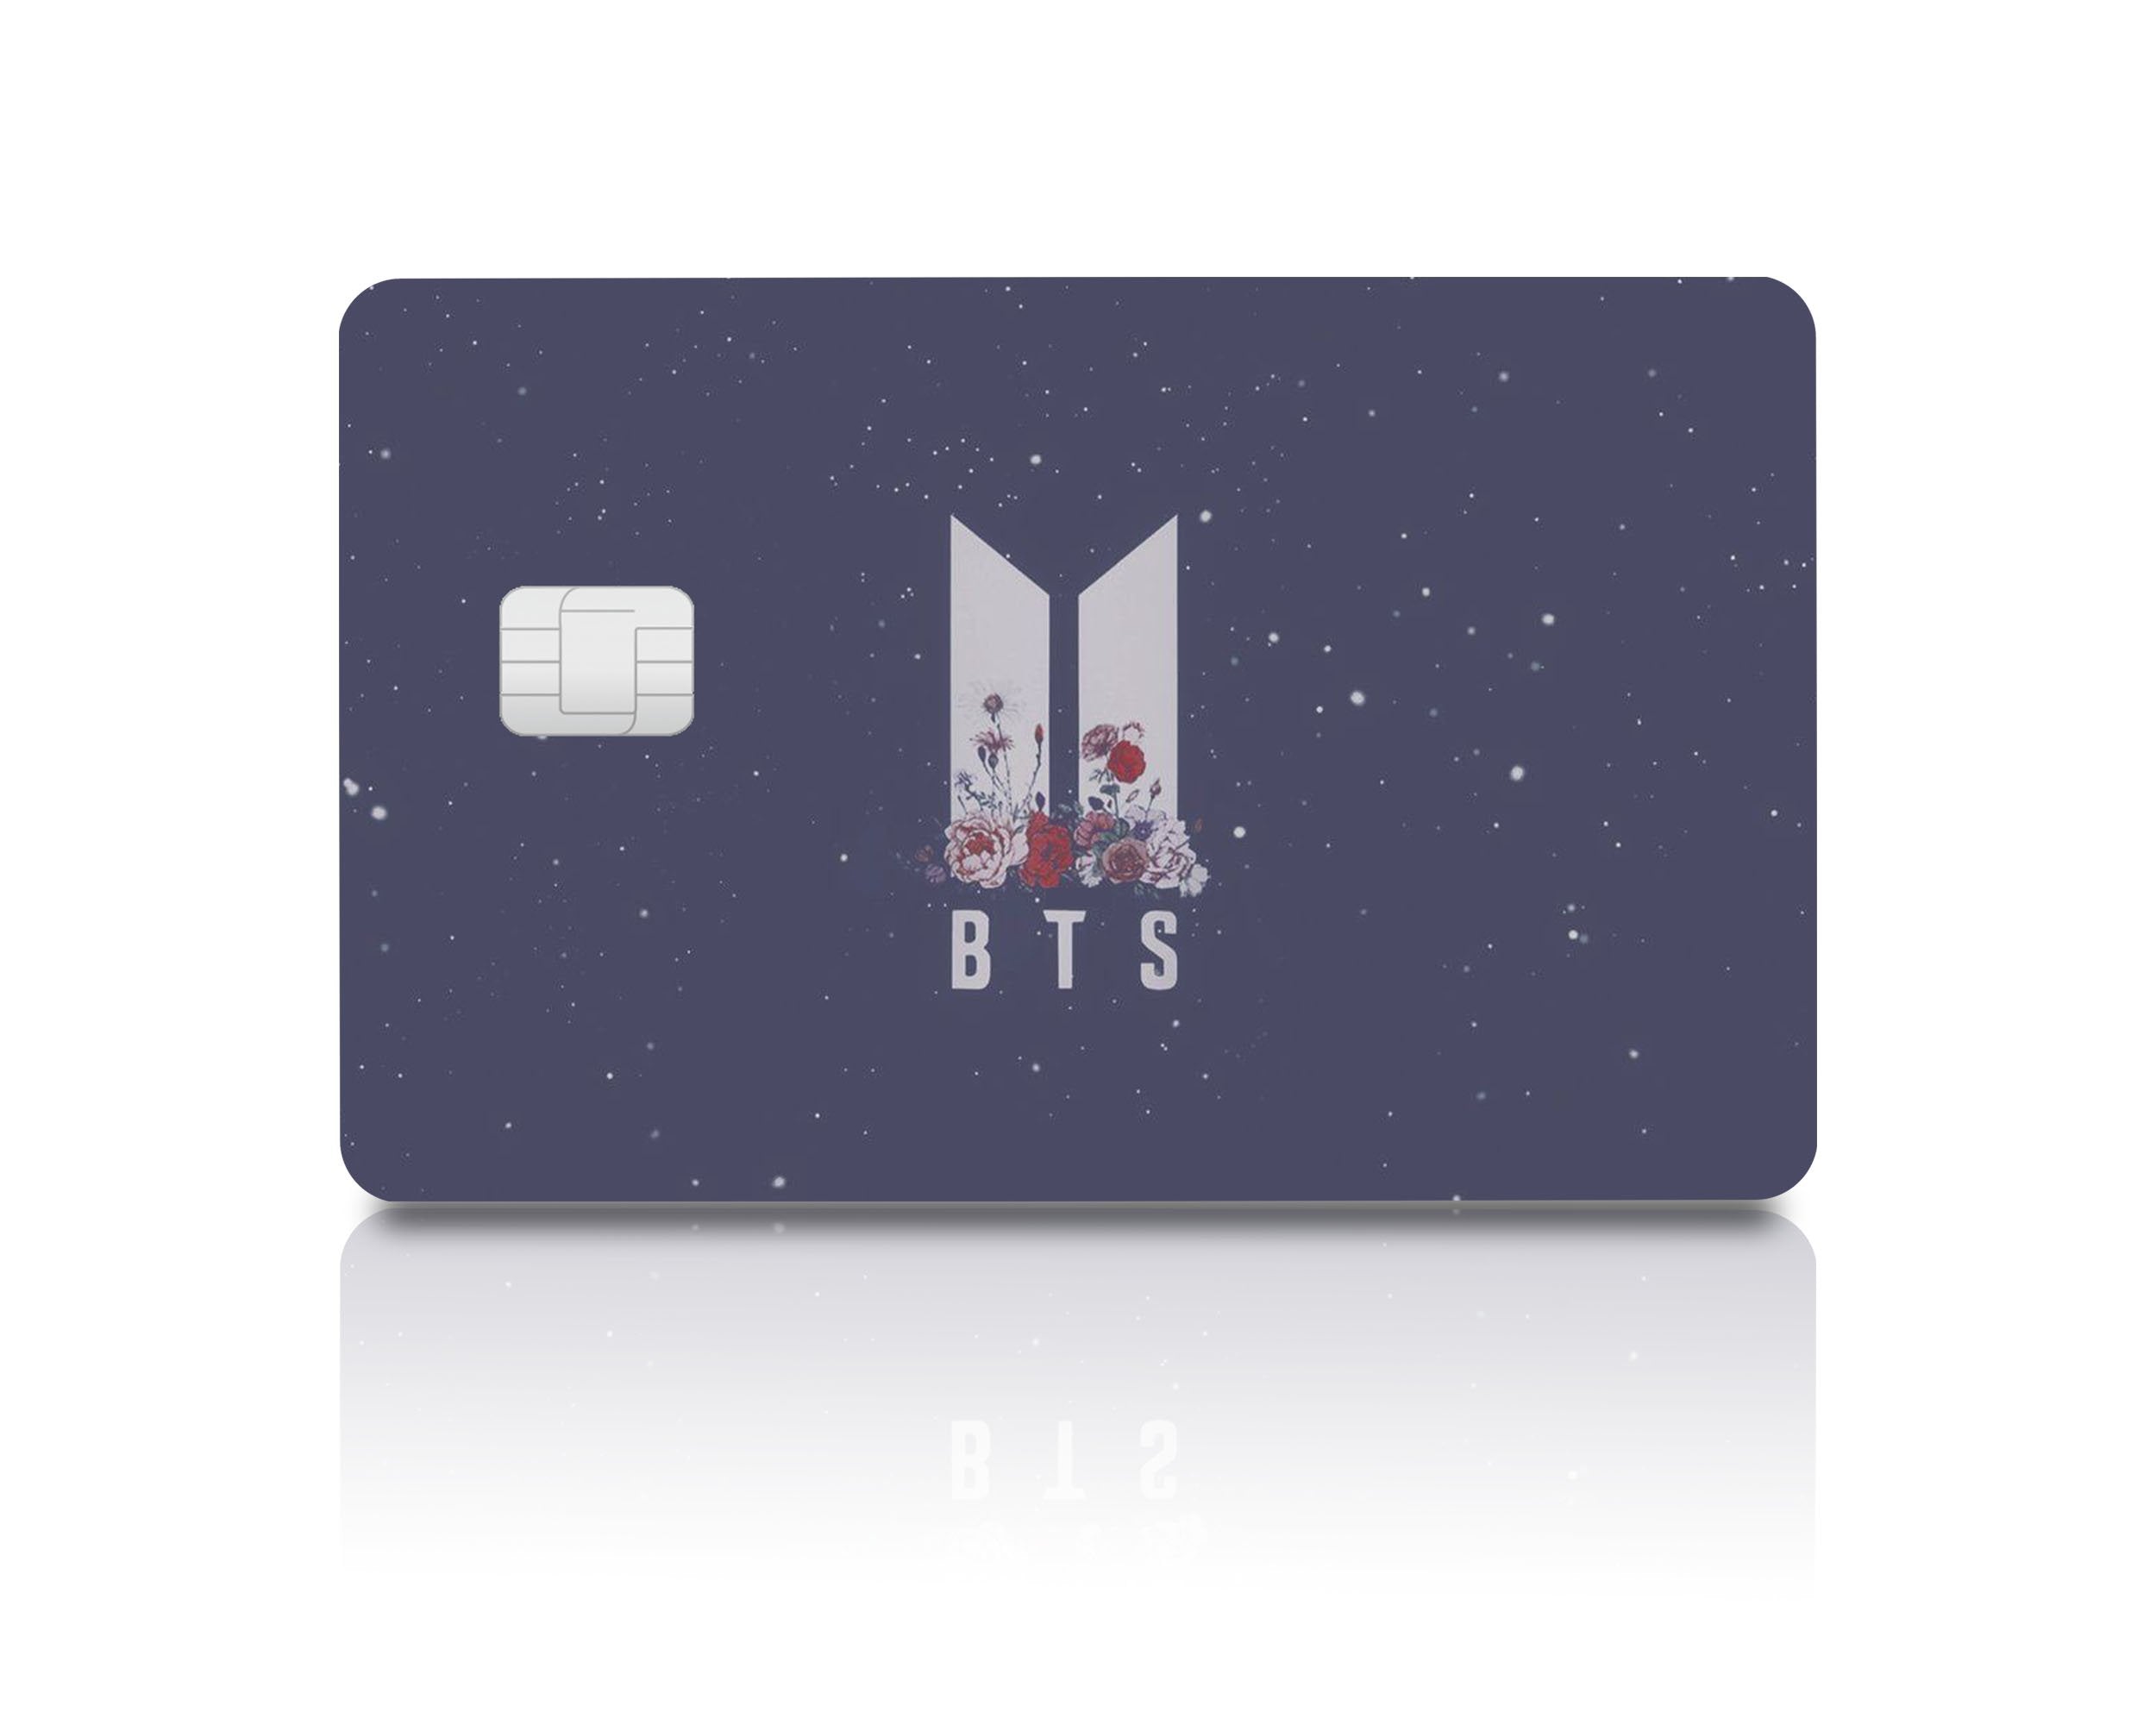 KPOP CARD SKIN DESIGNS PART 2 FOR DEBIT CARDS AND BEEP CARDS